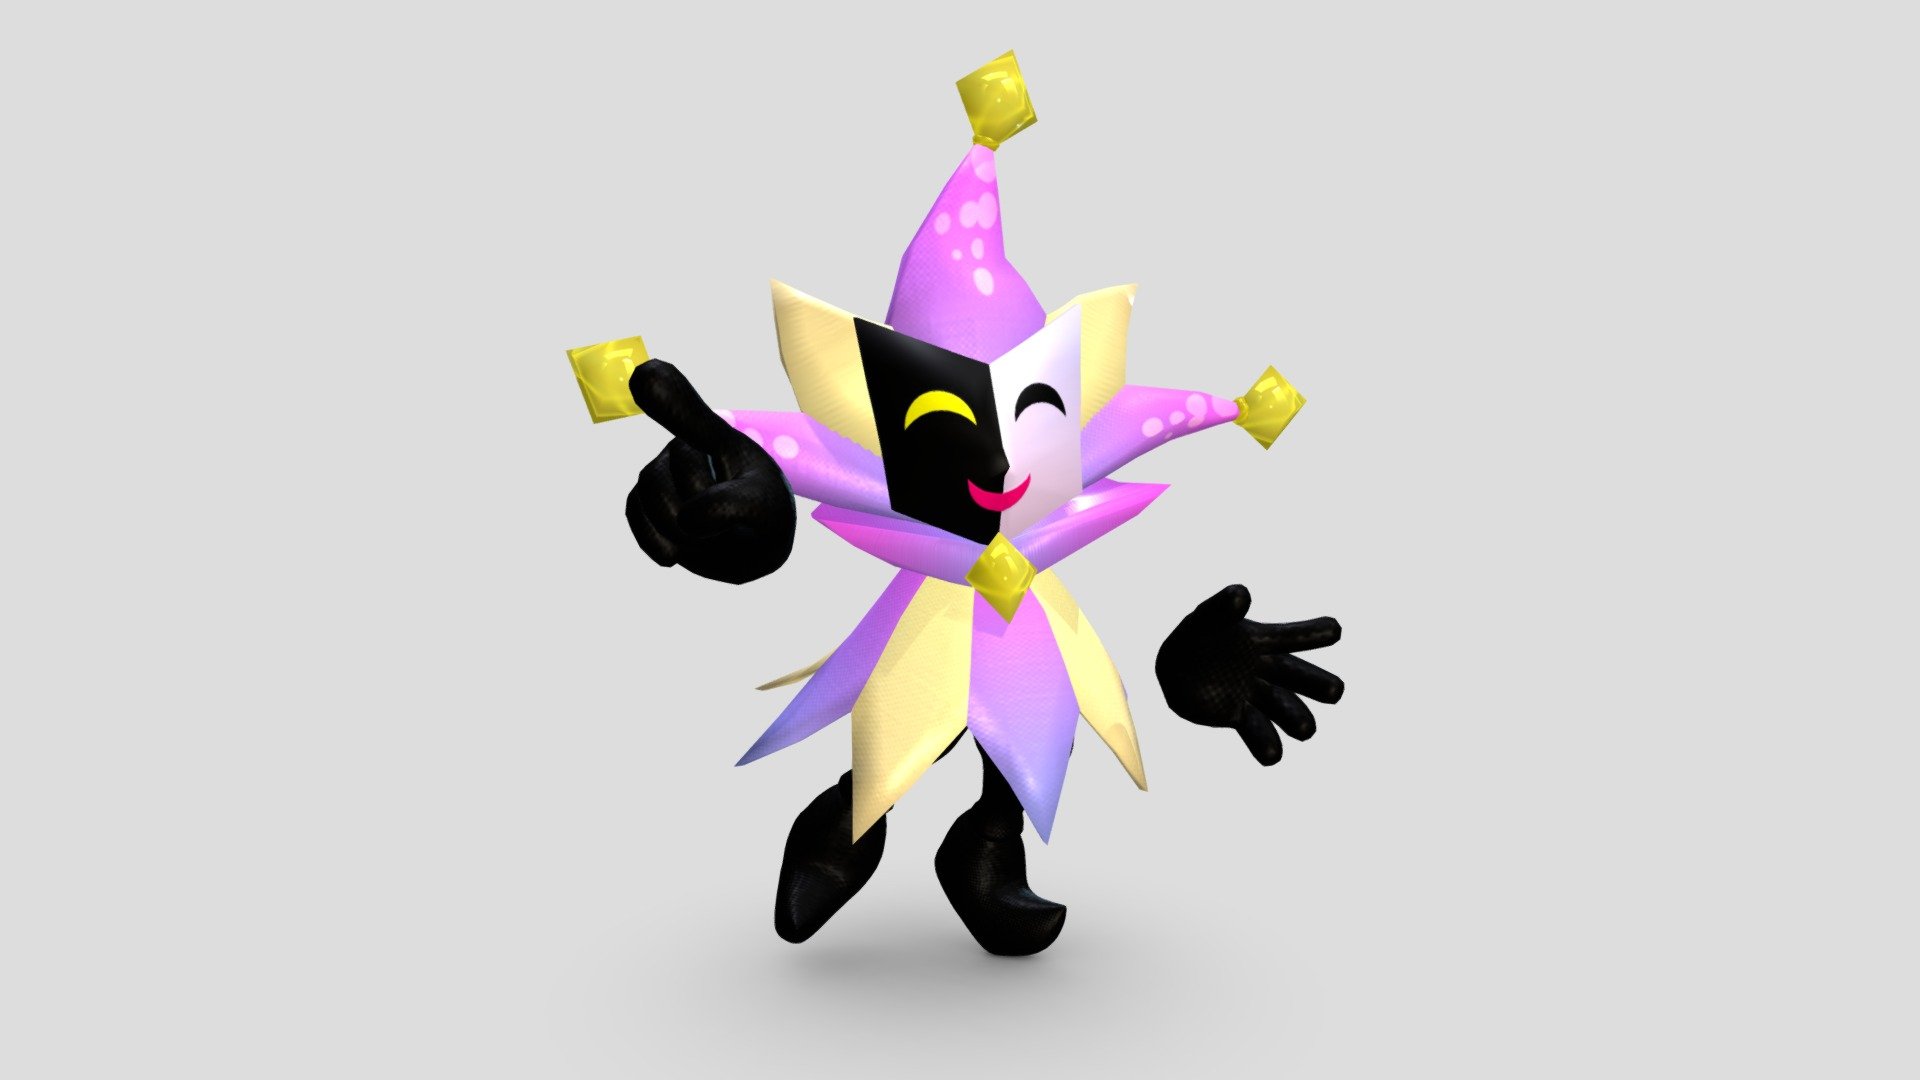 Dimentio Super Paper Mario 3d Model By Fawfulthegreat64 C763d17